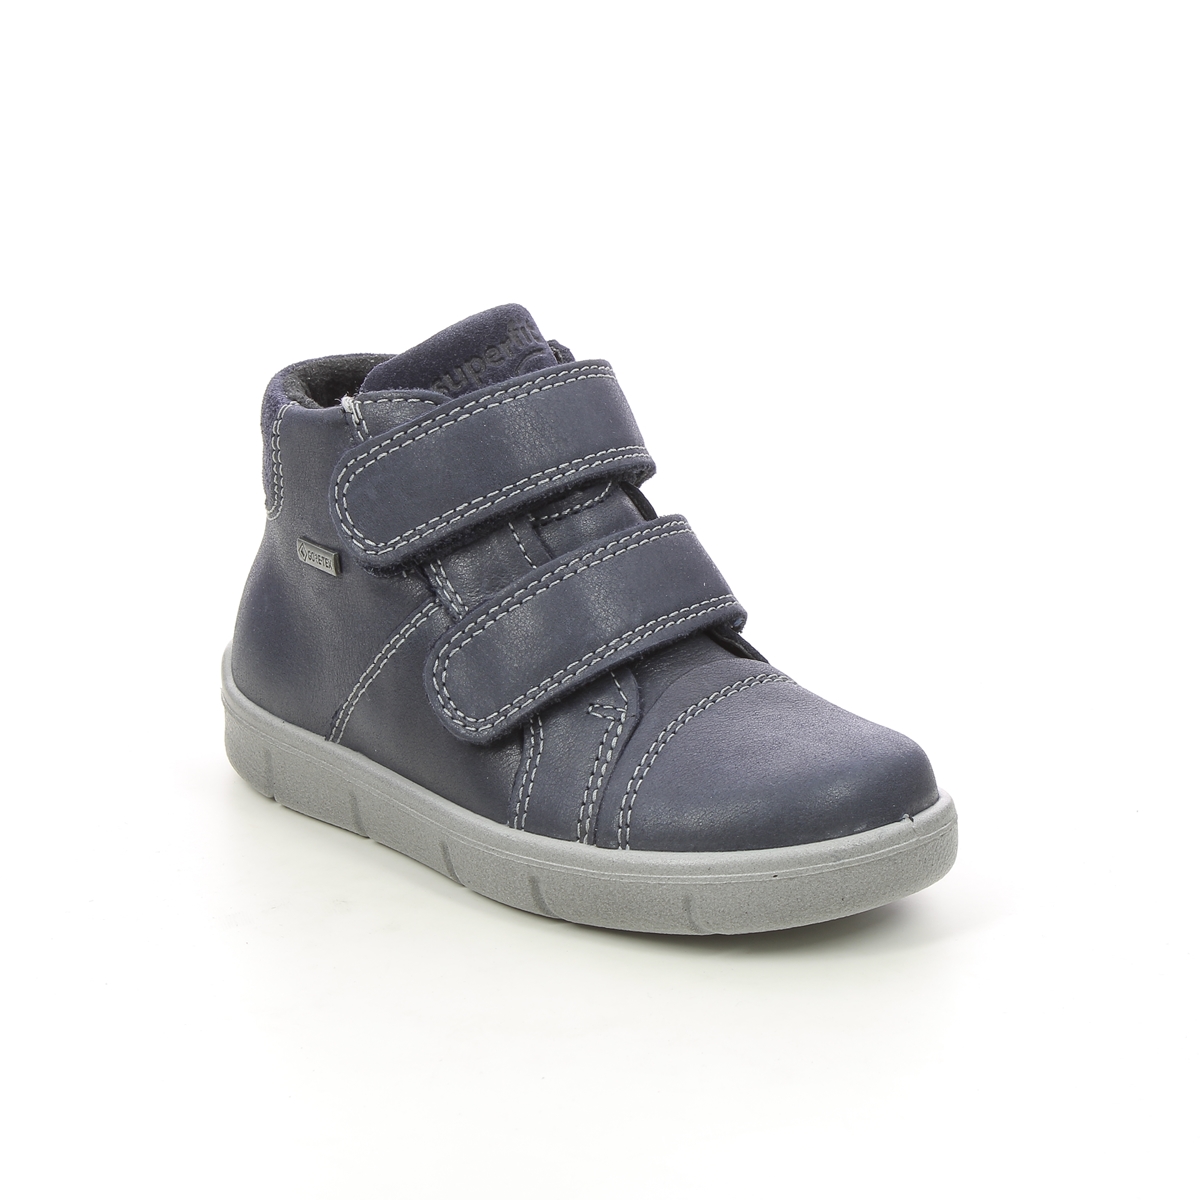 Superfit Ulli 2V Gtx Navy Leather Kids Toddler Boys Boots 0800423-8000 In Size 24 In Plain Navy Leather